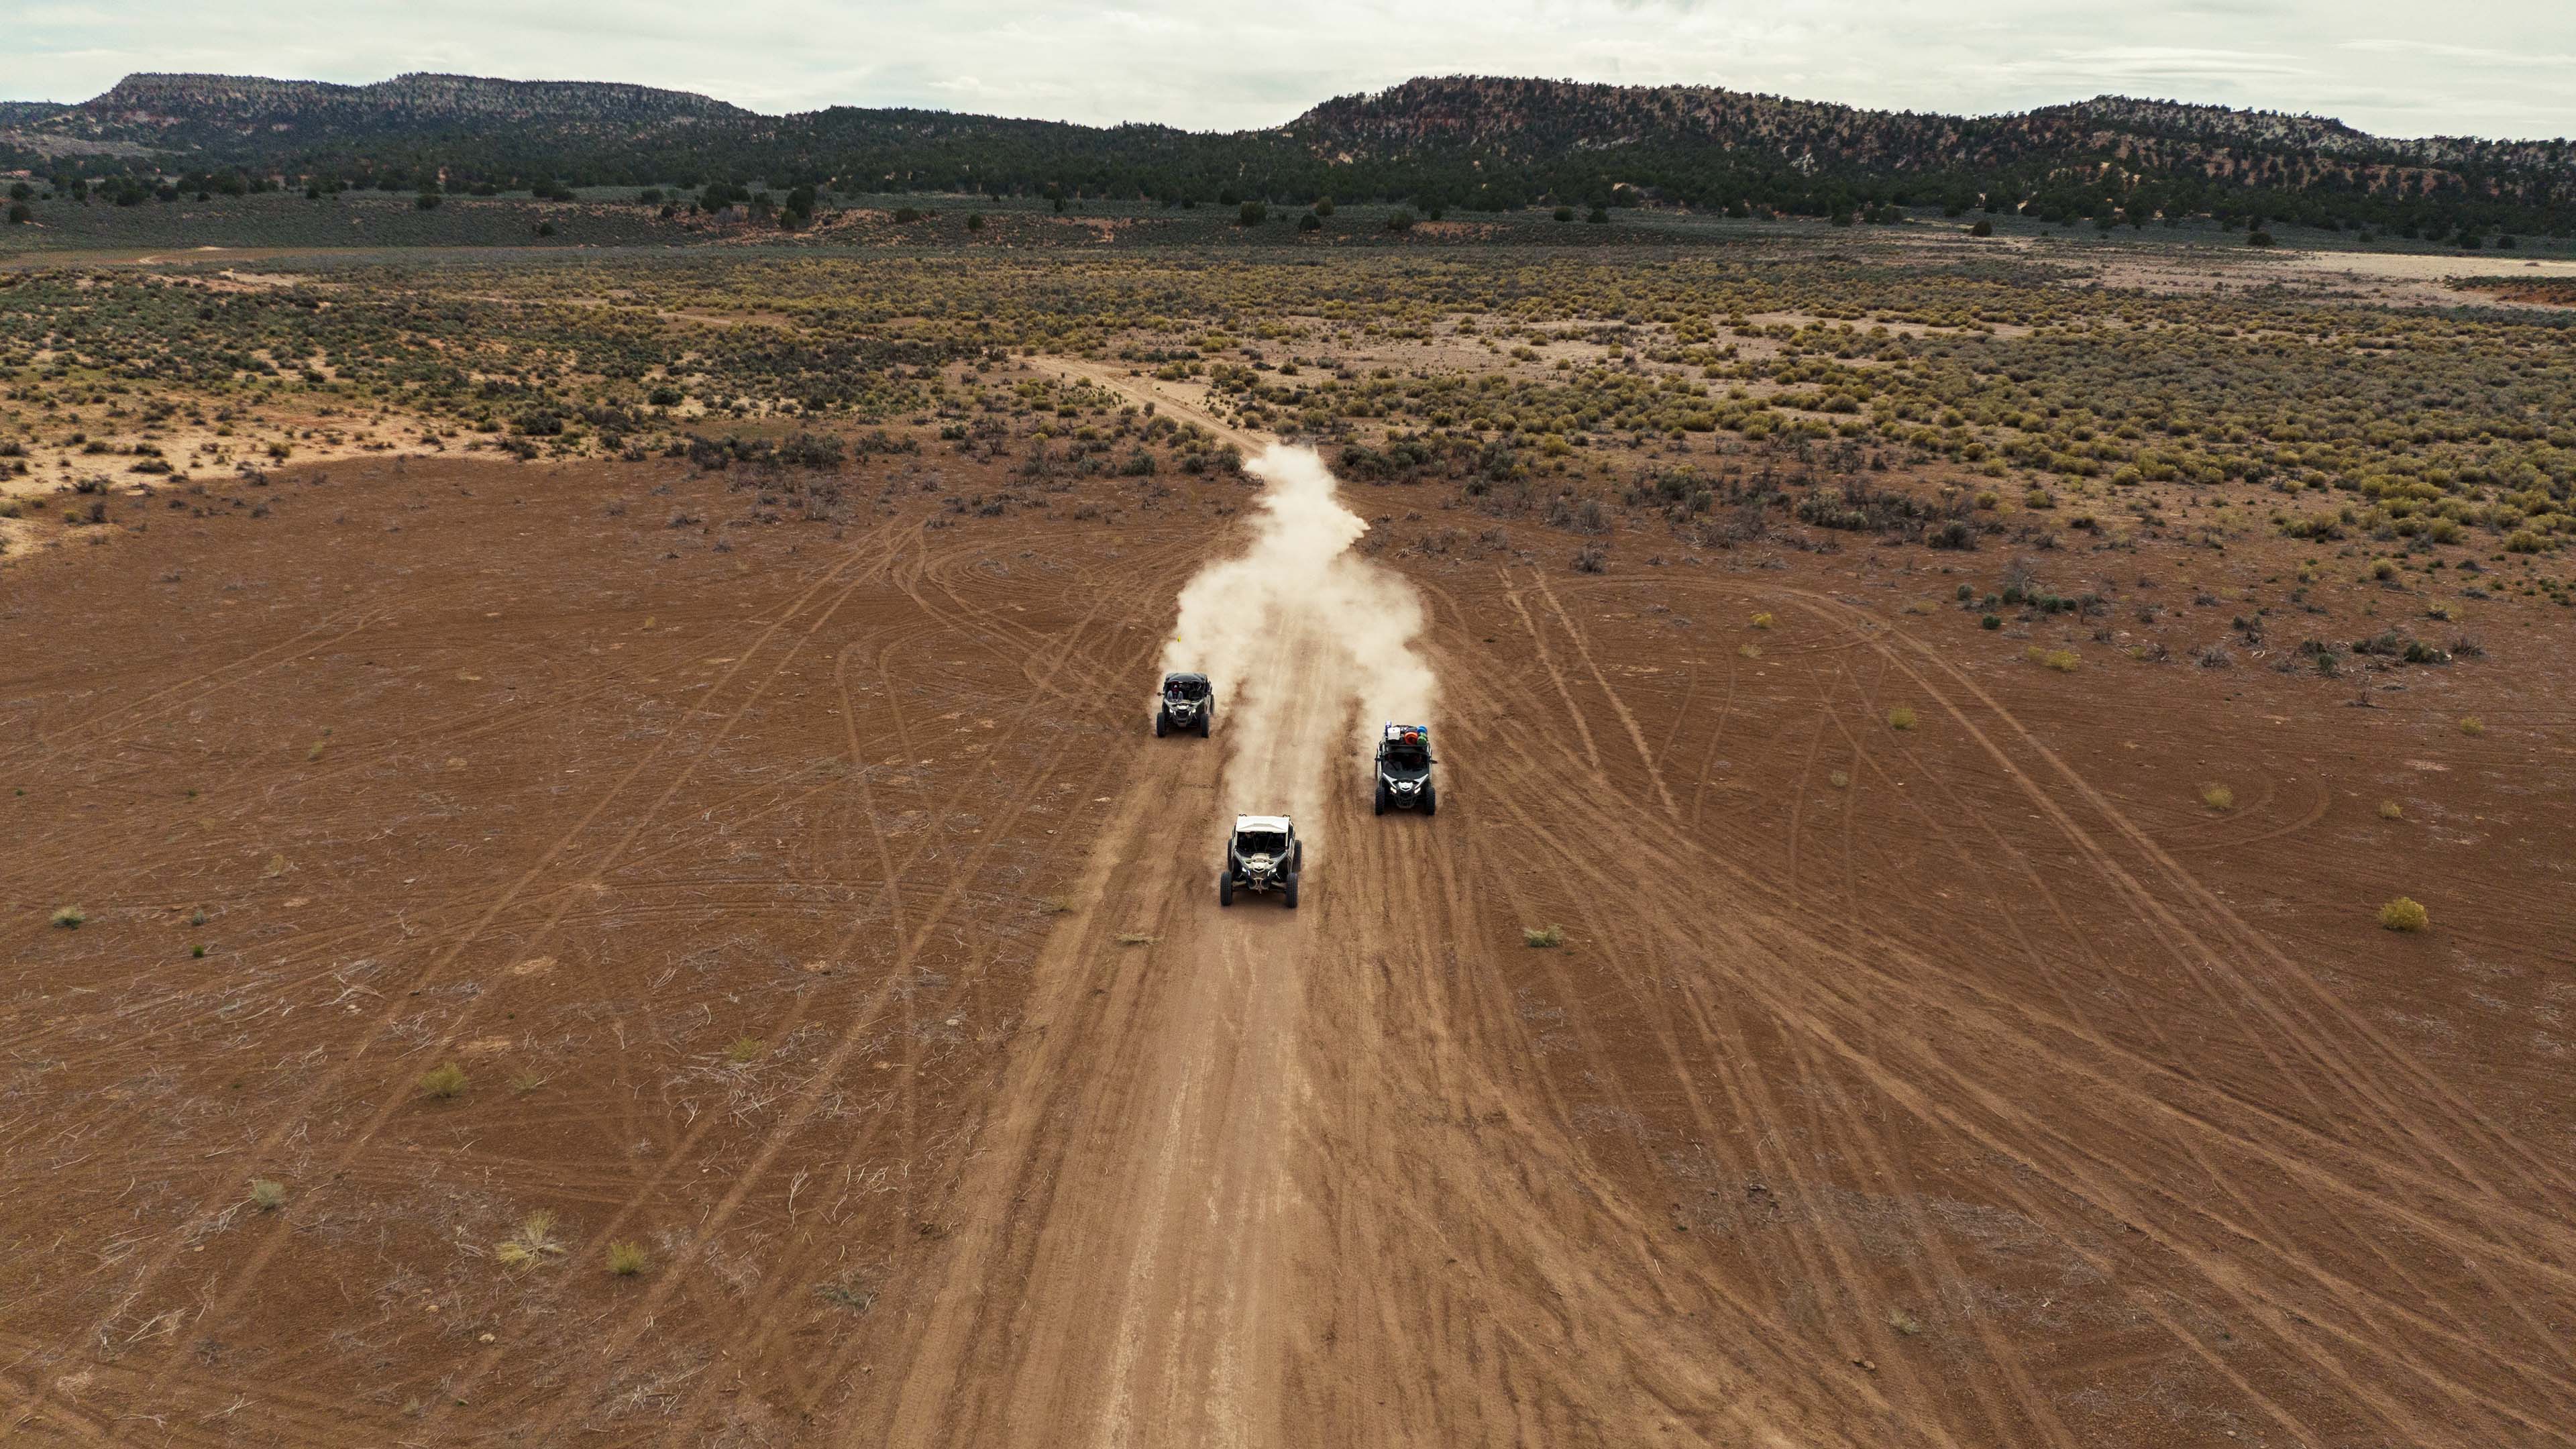 Arial view of three Can-Am side-by-sides on a path in a desert setting.